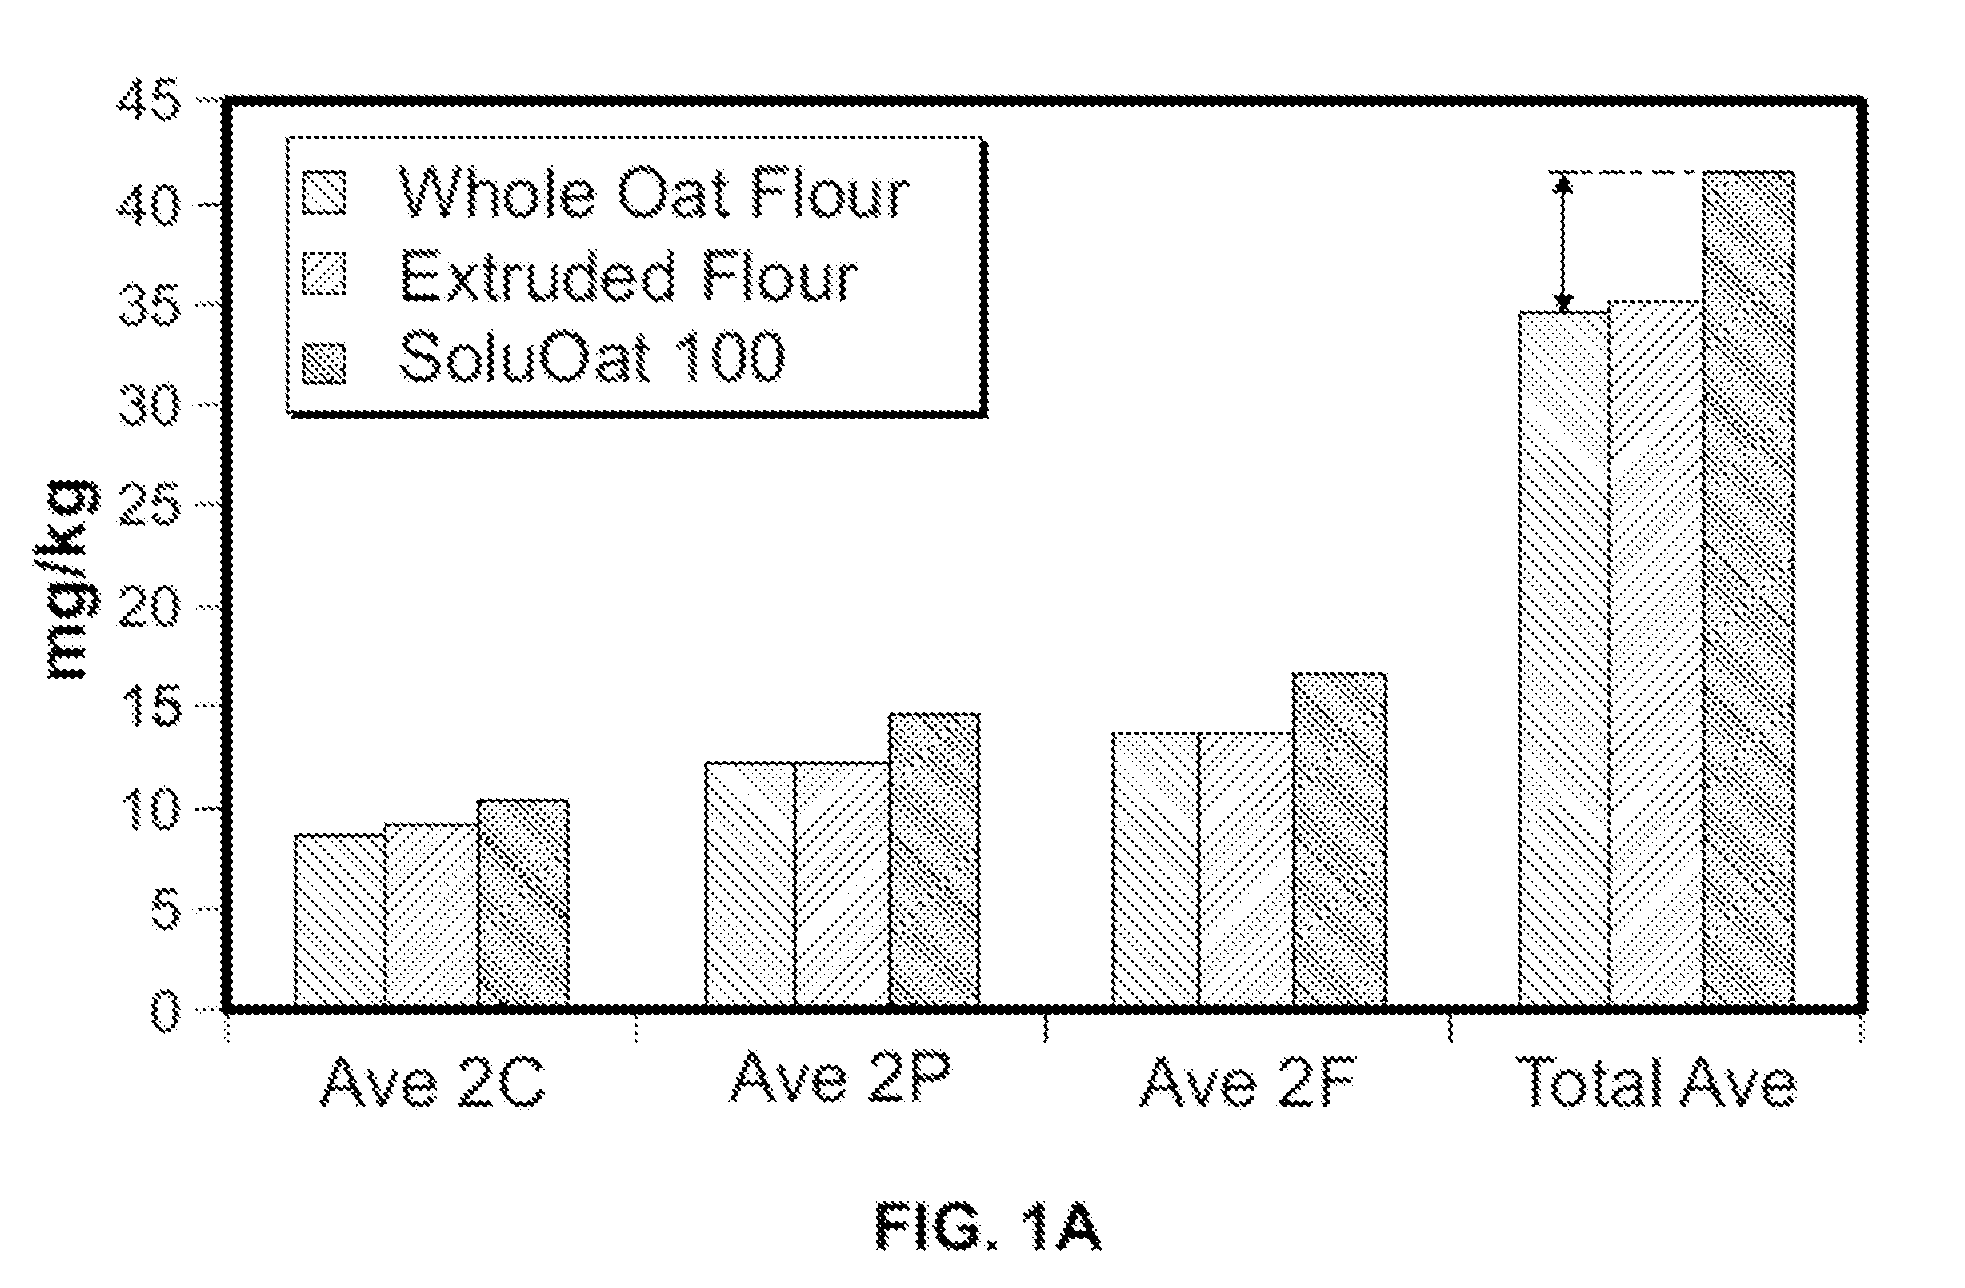 Method of processing oats to achieve oats with an increased avenanthramide content